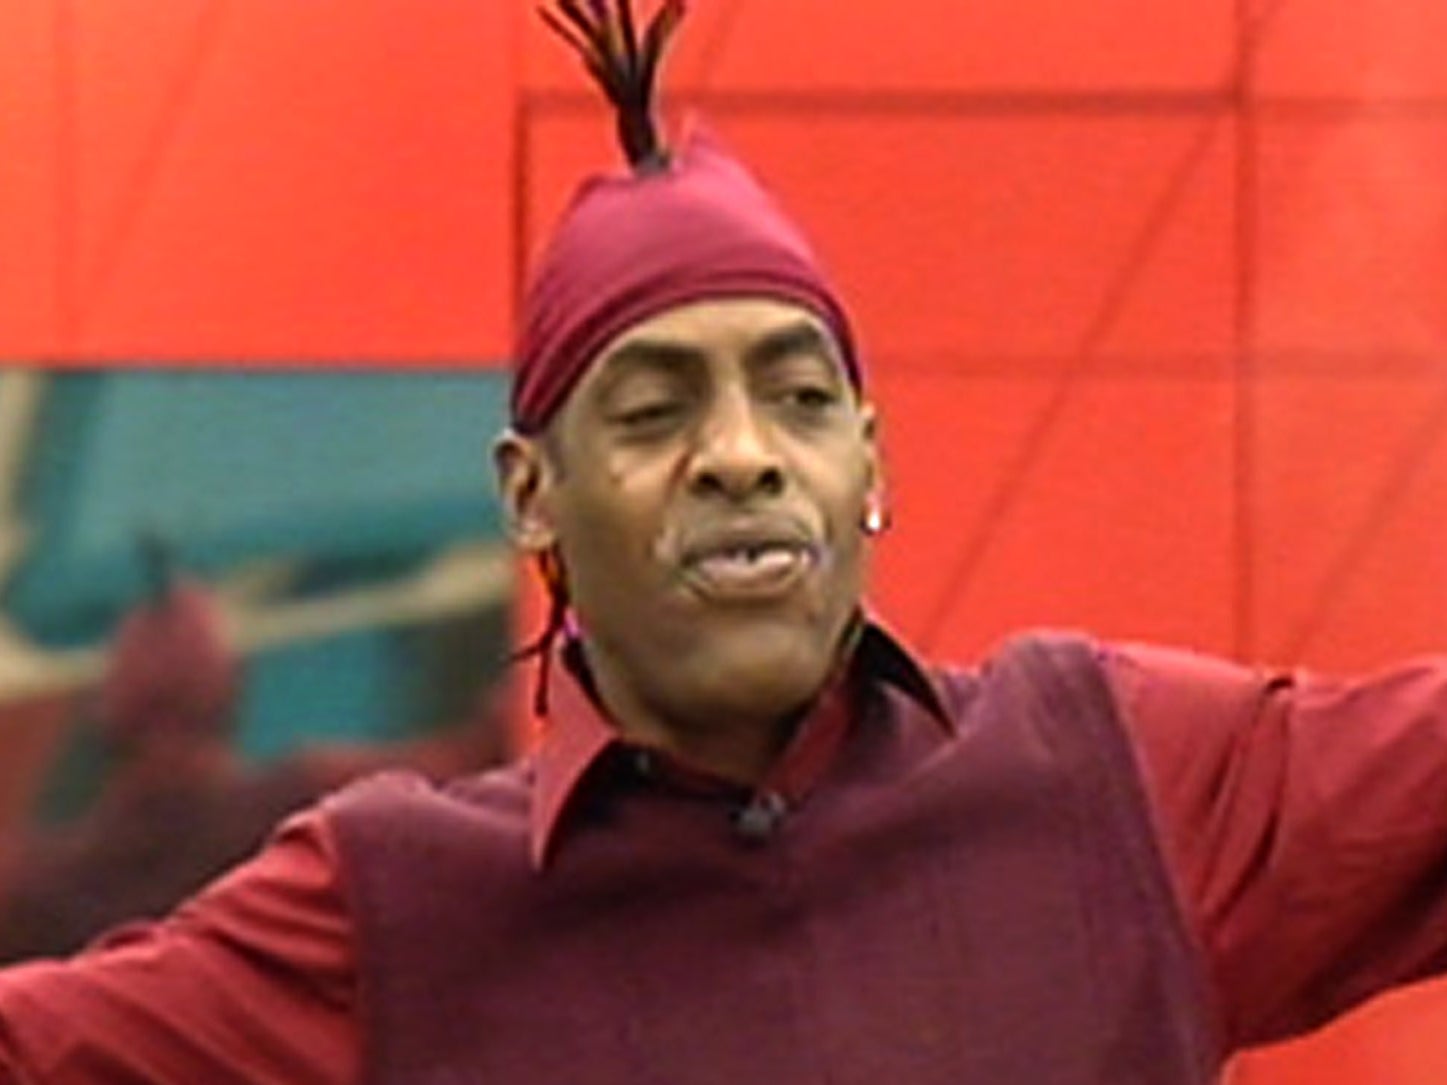 Coolio on ‘Celebrity Big Brother’ in 2009